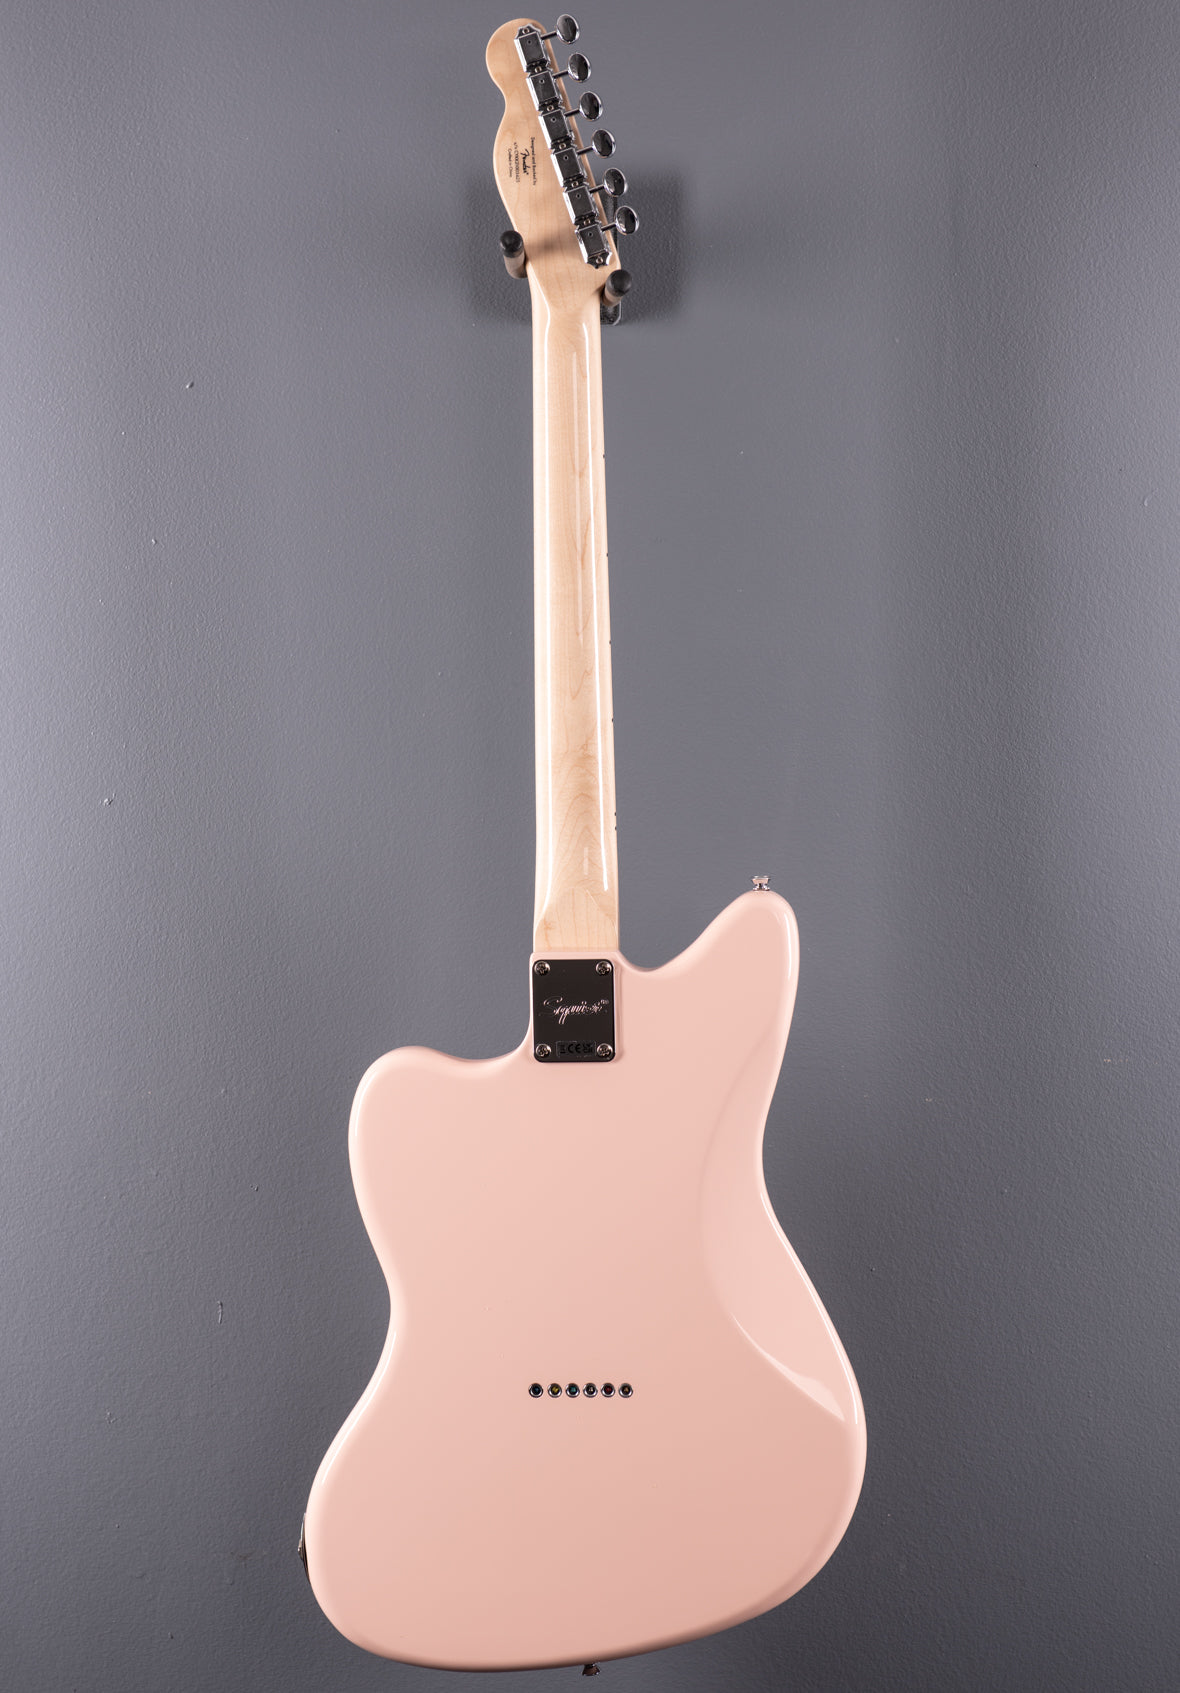 Paranormal Offset Telecaster - Shell Pink